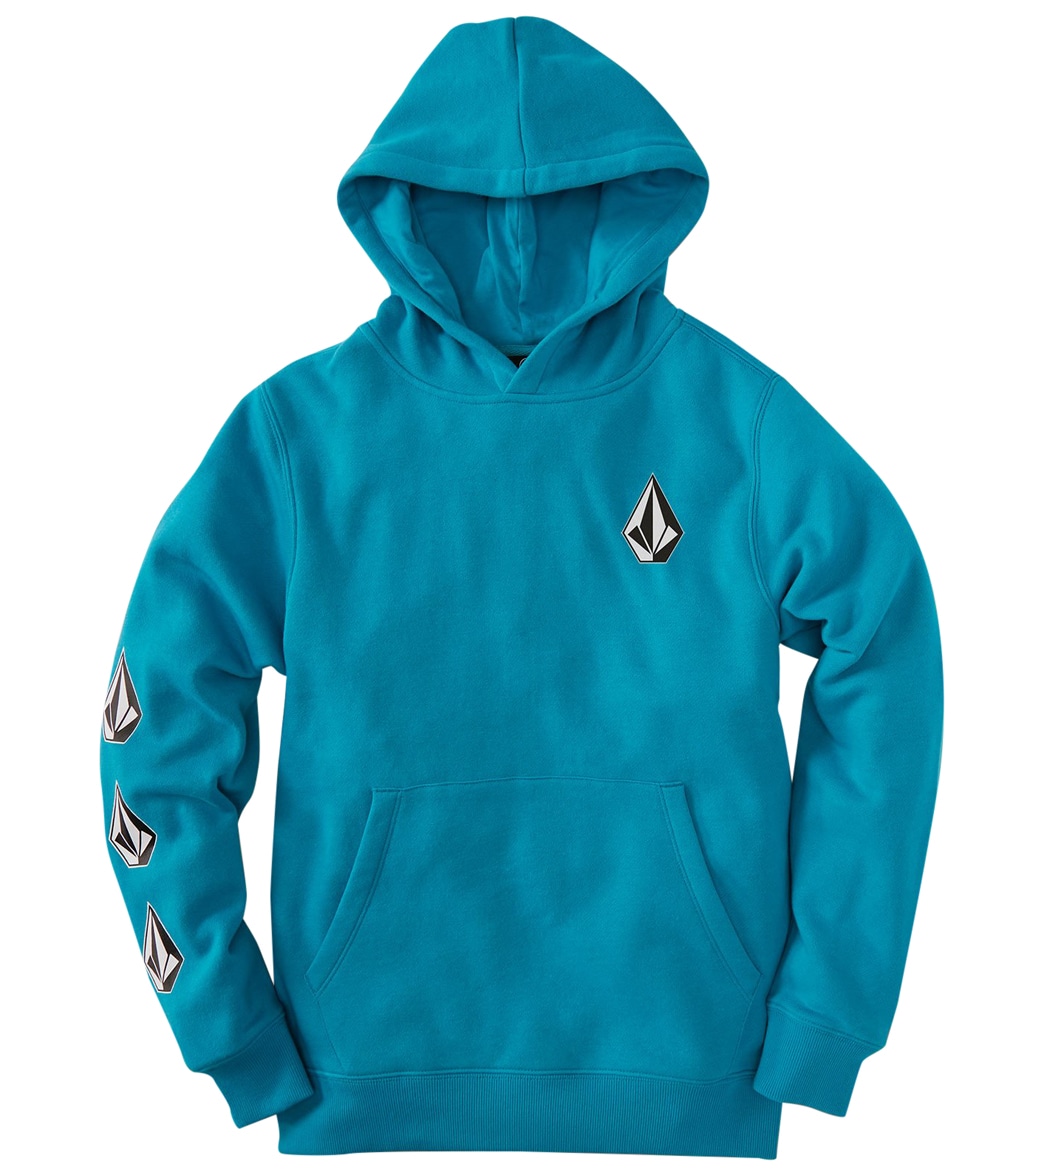 Volcom Boys' Iconic Stone Pullover Sweatshirt - Barrier Reef Large Cotton/Polyester - Swimoutlet.com